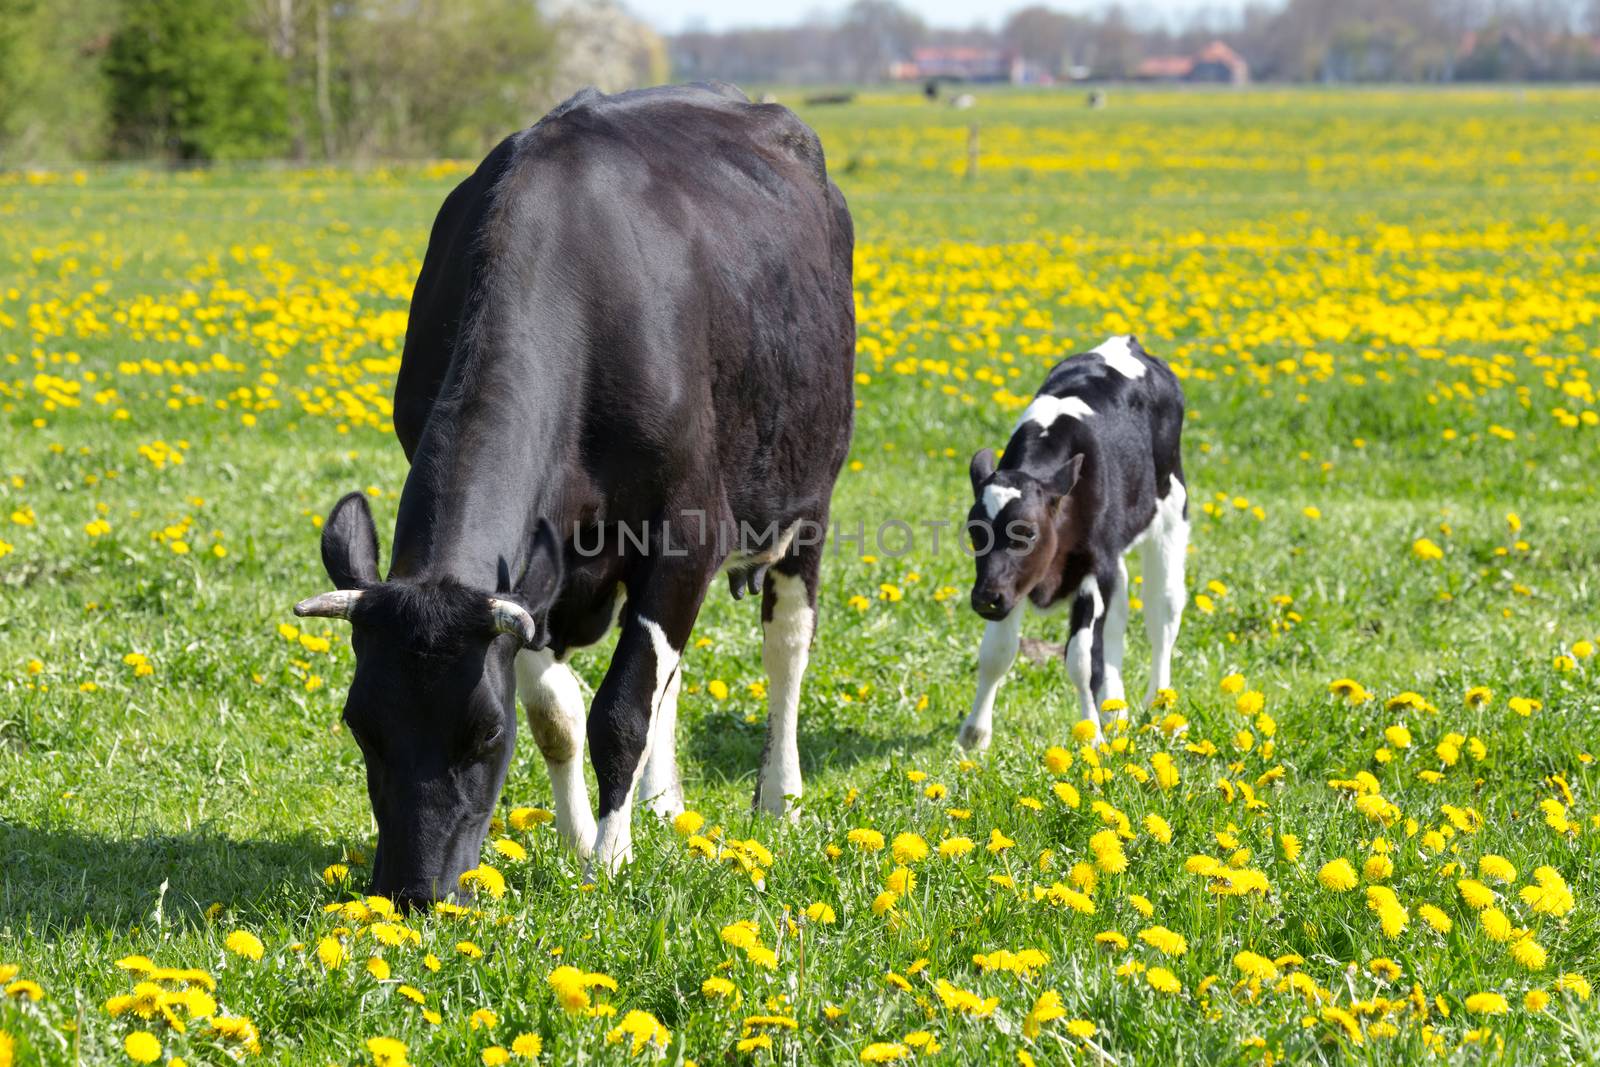 Spotted mother cow and calf in meadow with yellow dandelions by BenSchonewille